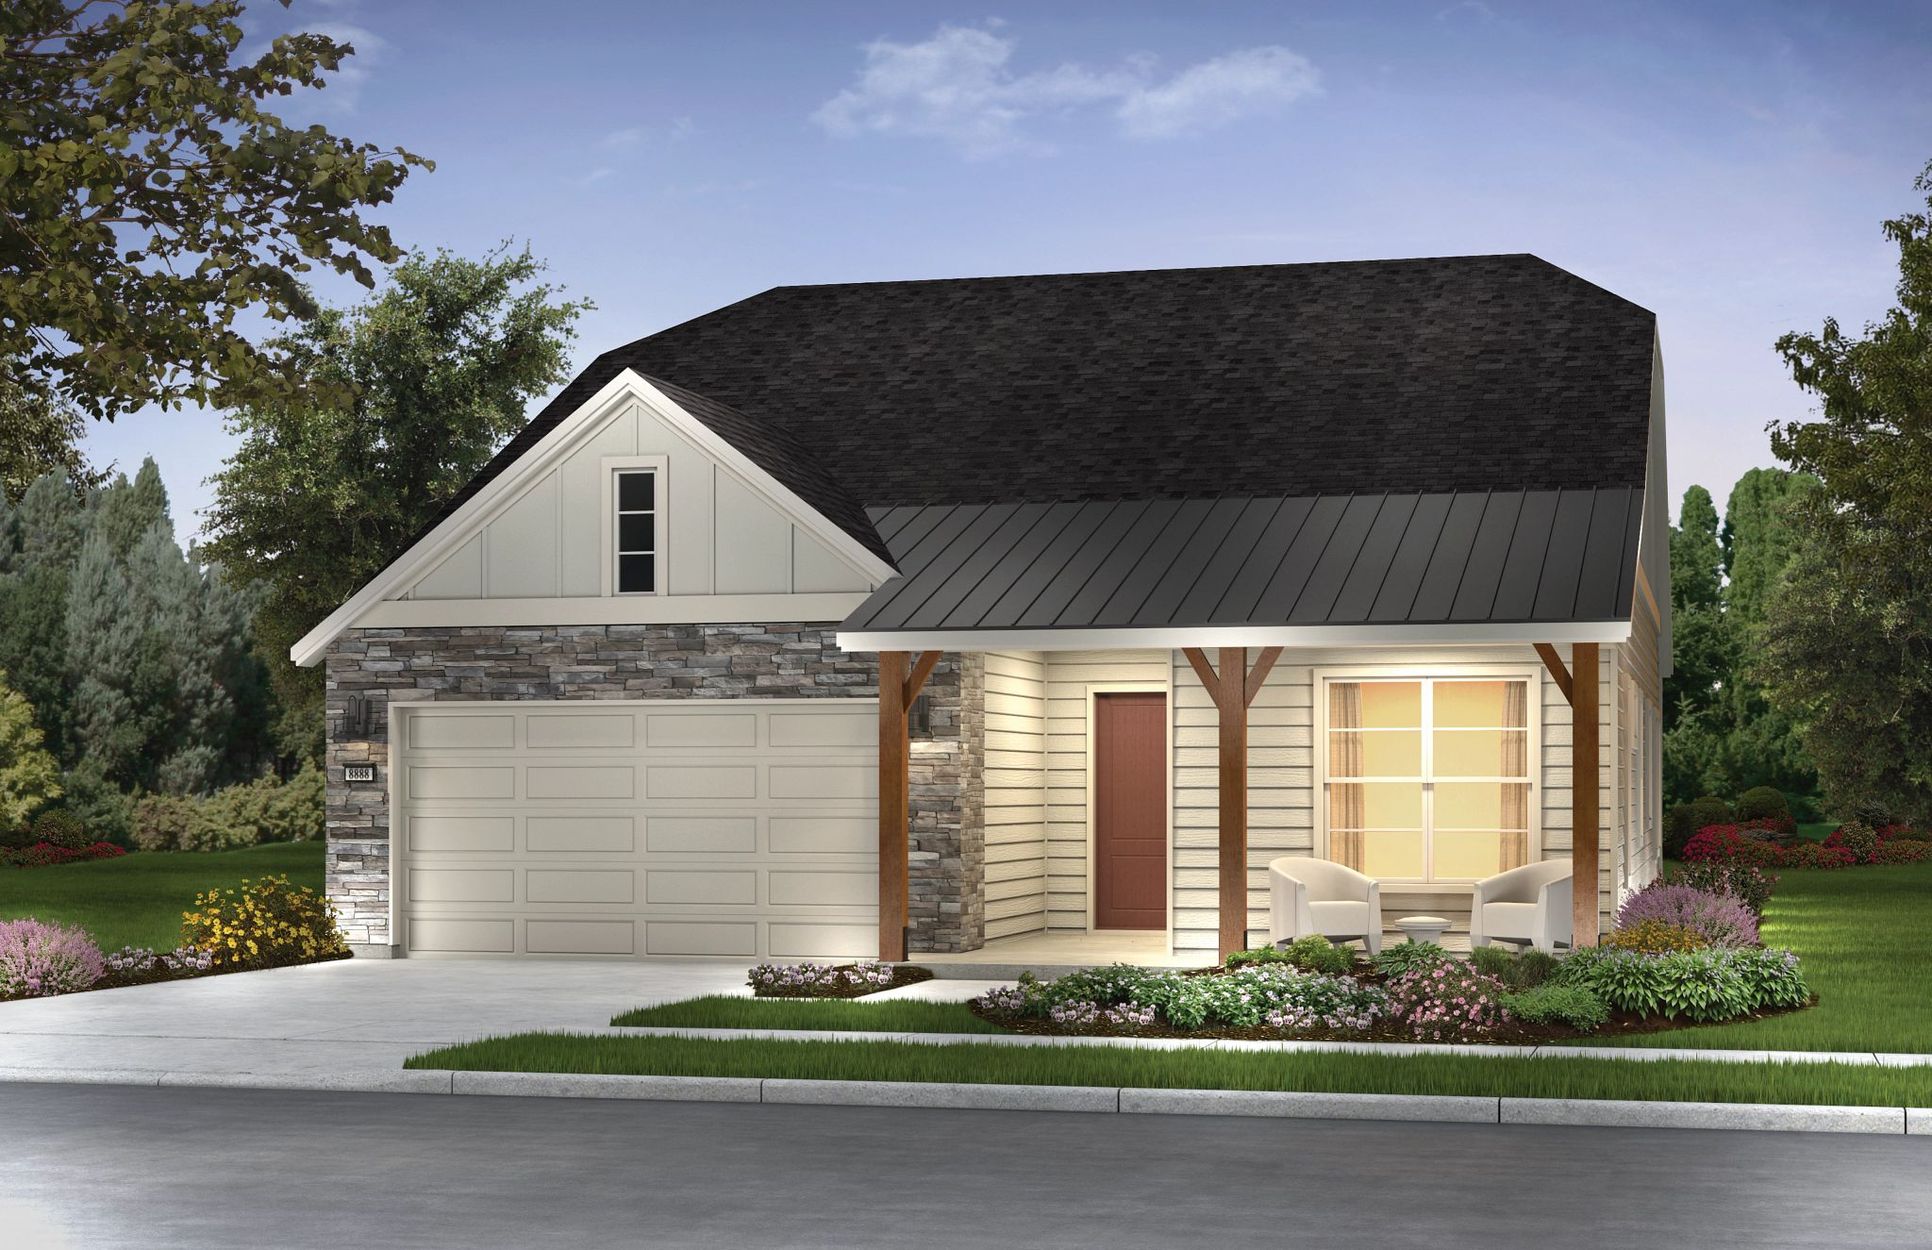 Trilogy at Lake Frederick Refresh Exterior:Ext B: Contemp Ranch; Color: